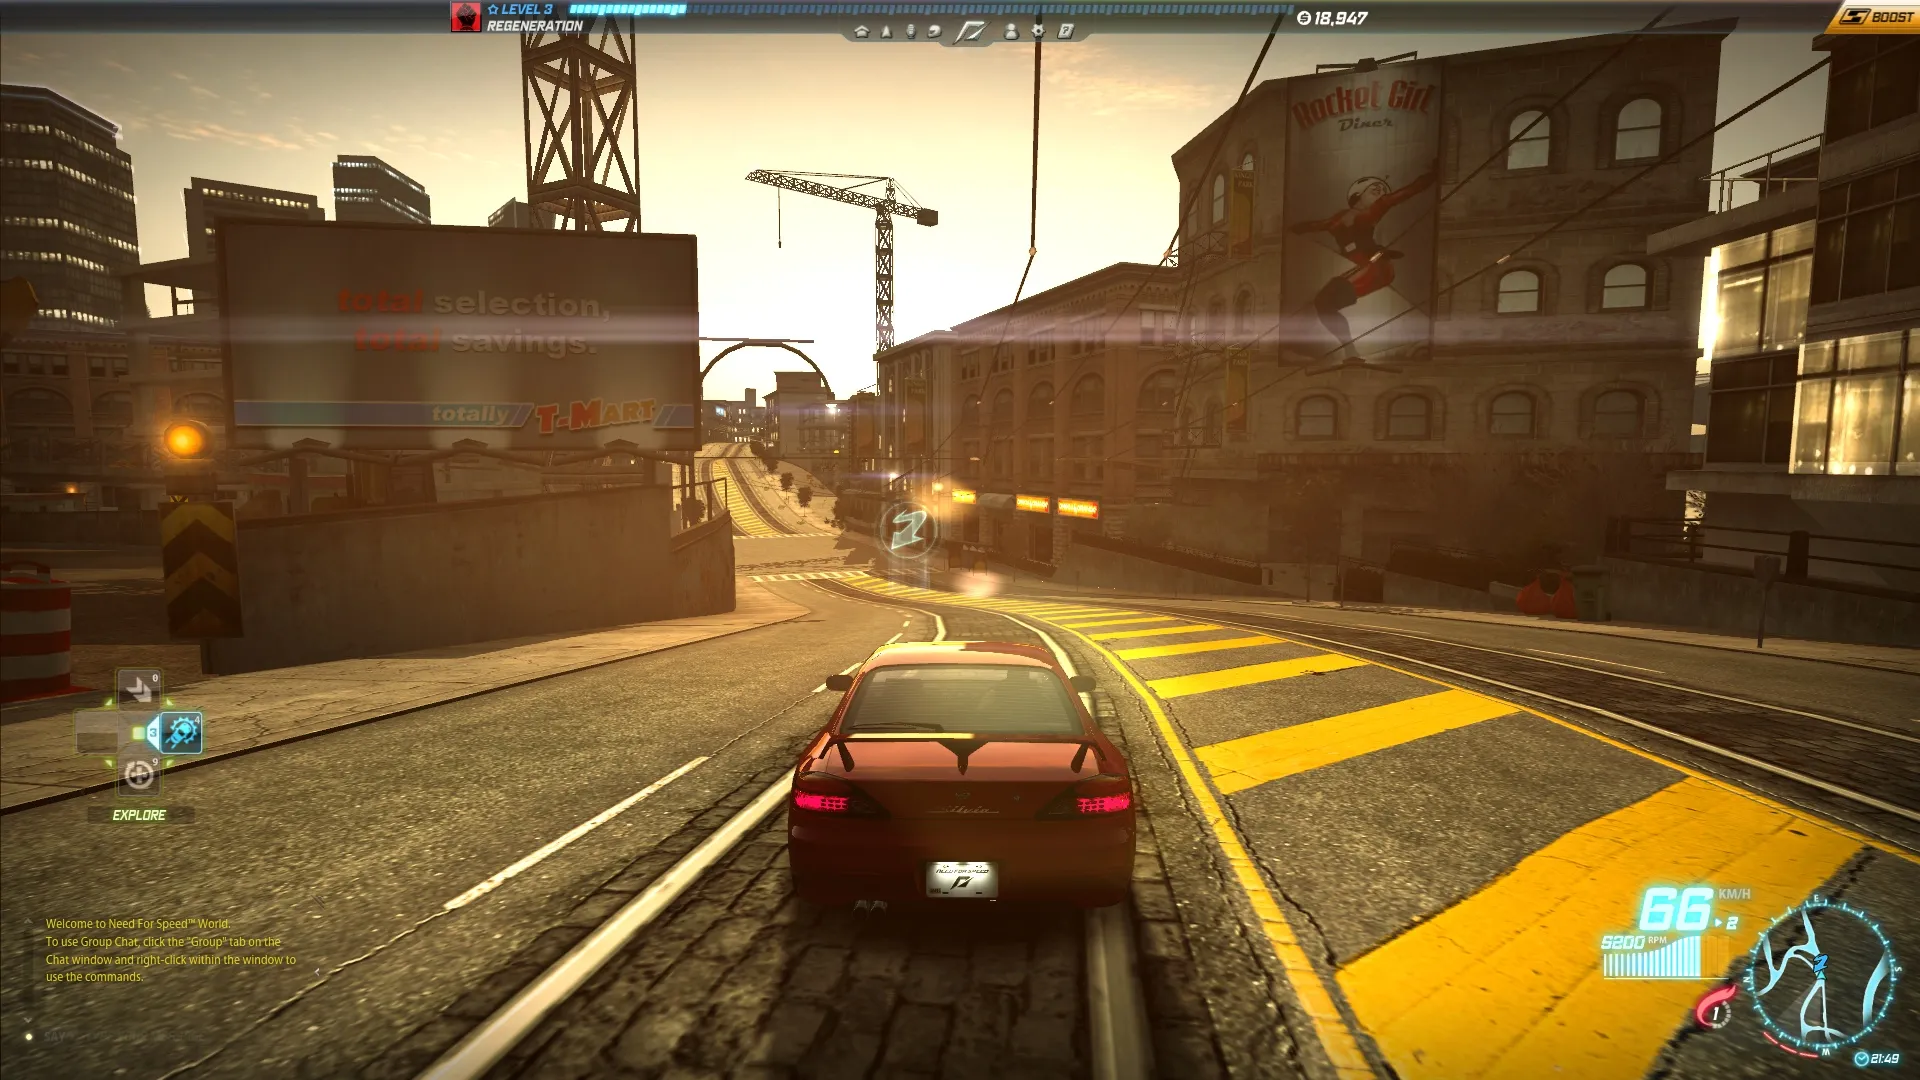 Need For Speed World - MMOGames.com